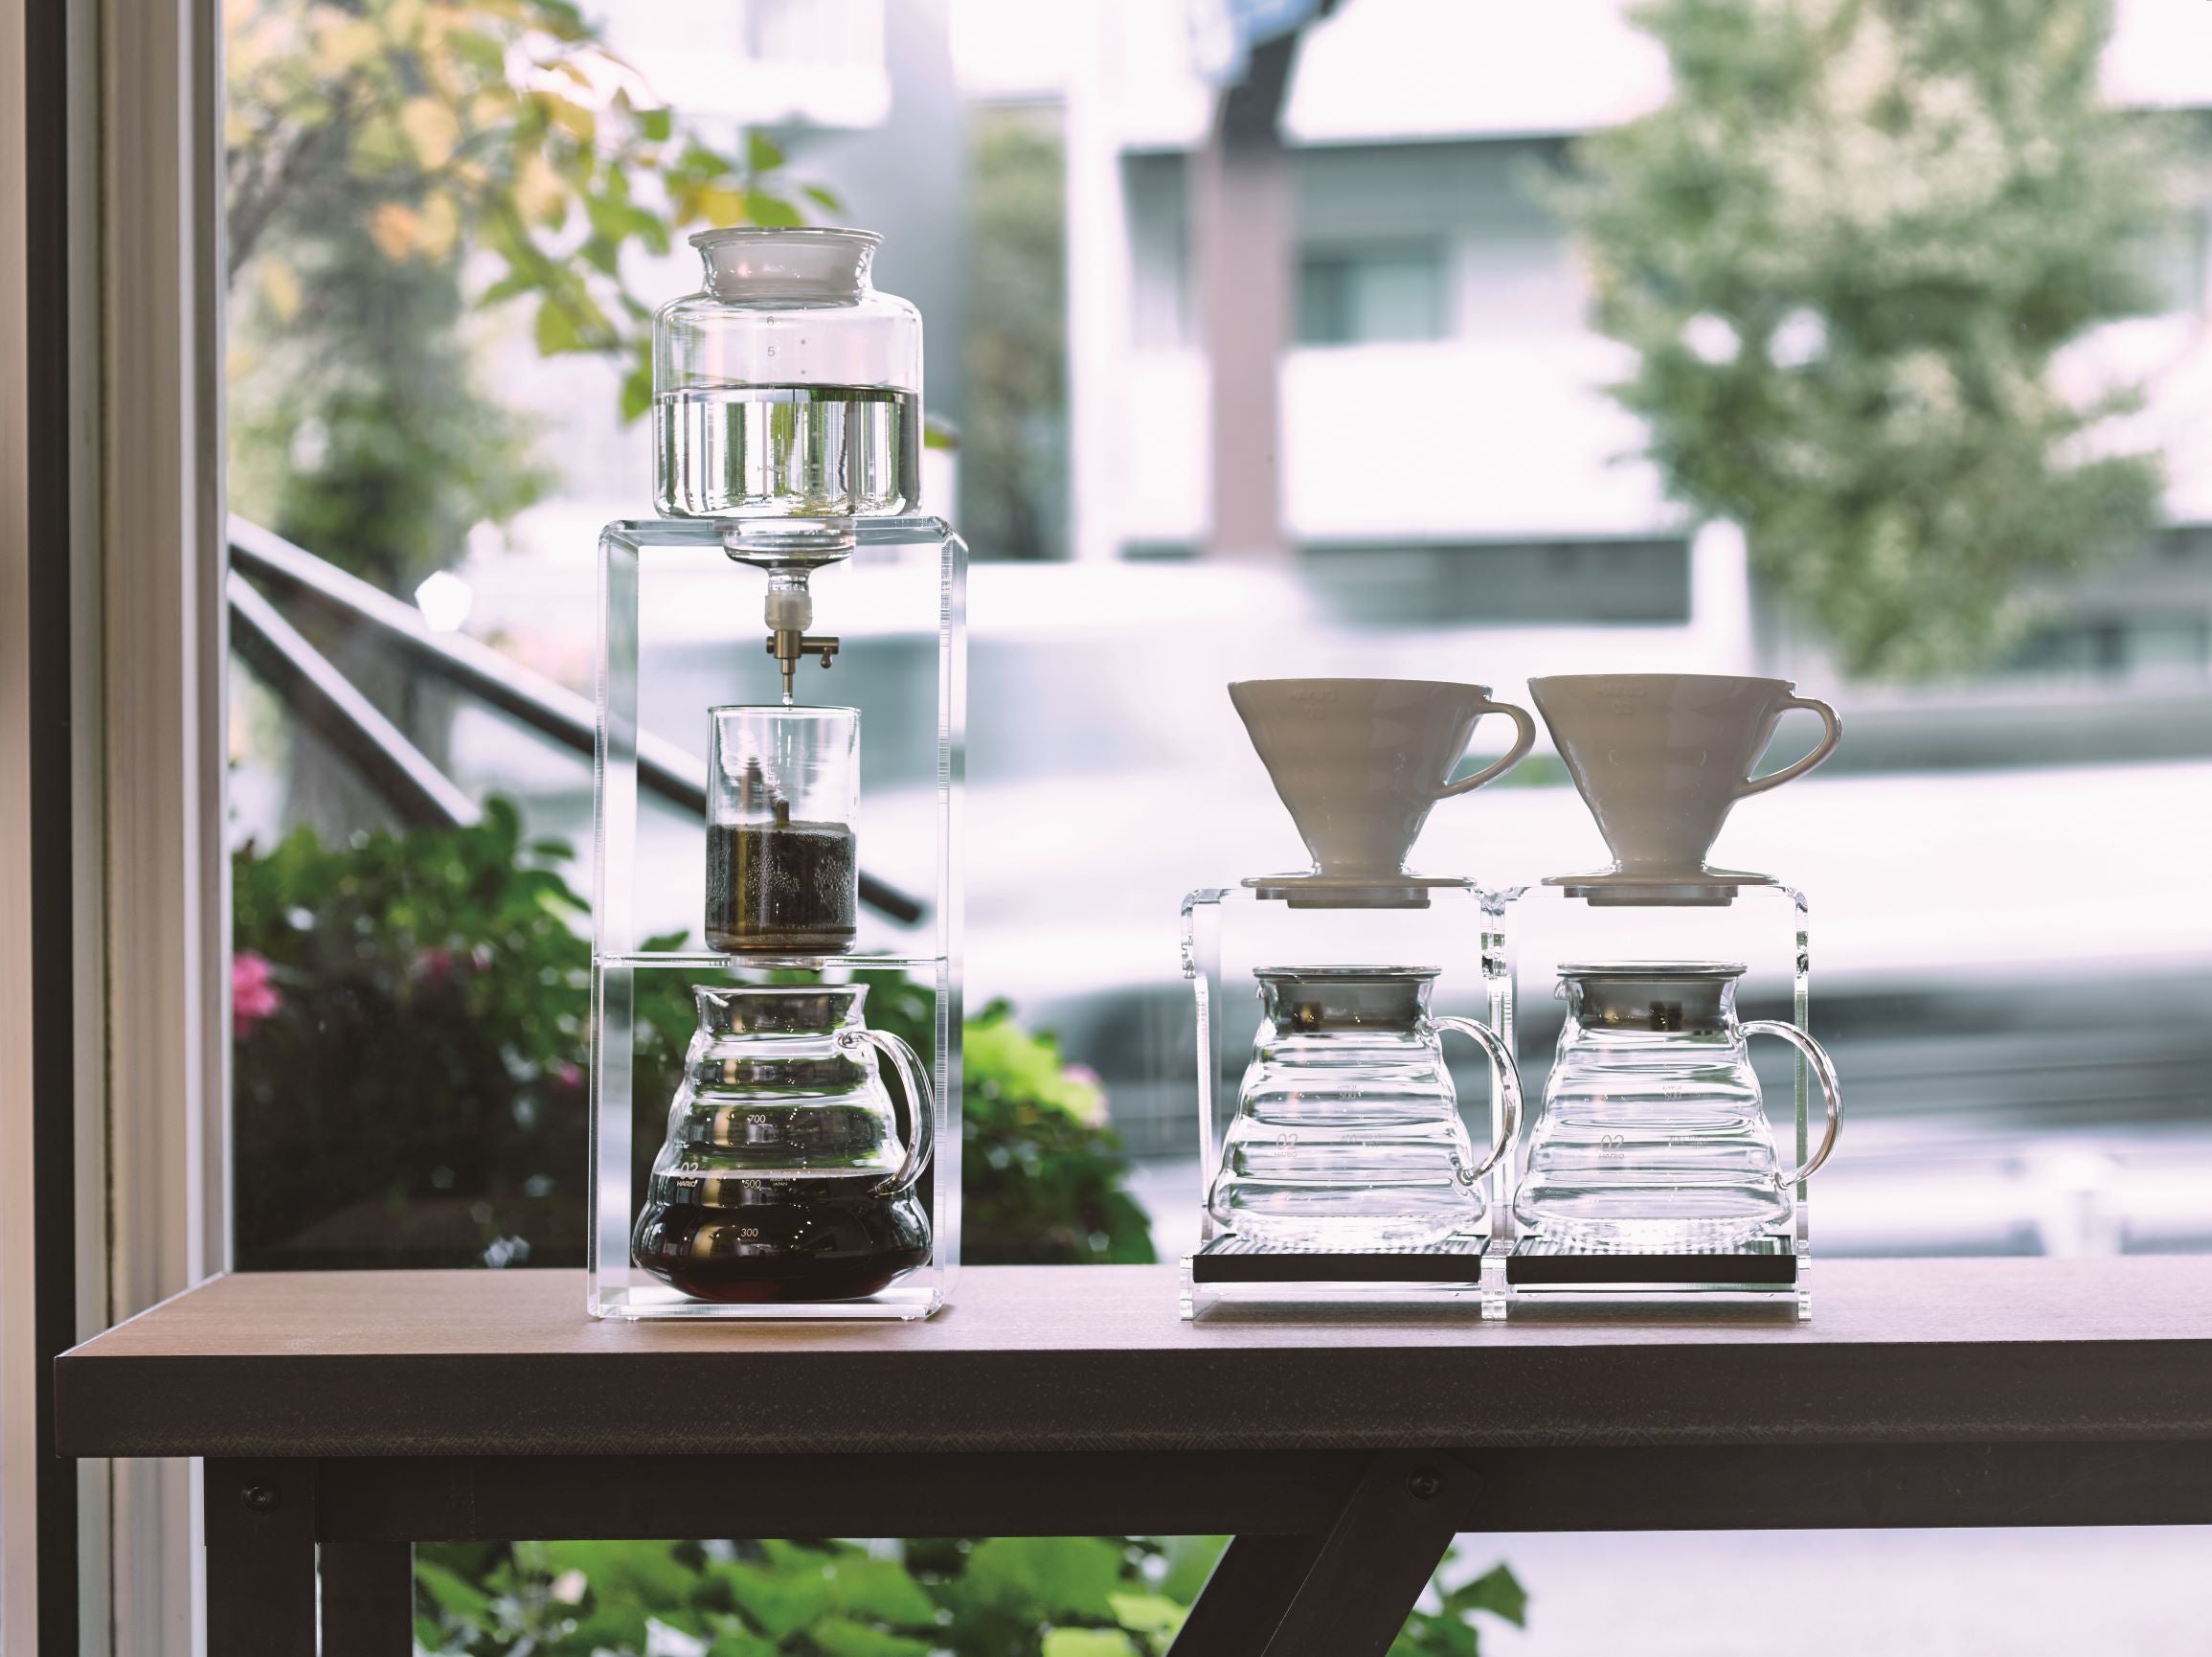 Beginner's Guide To V60 Pour Over